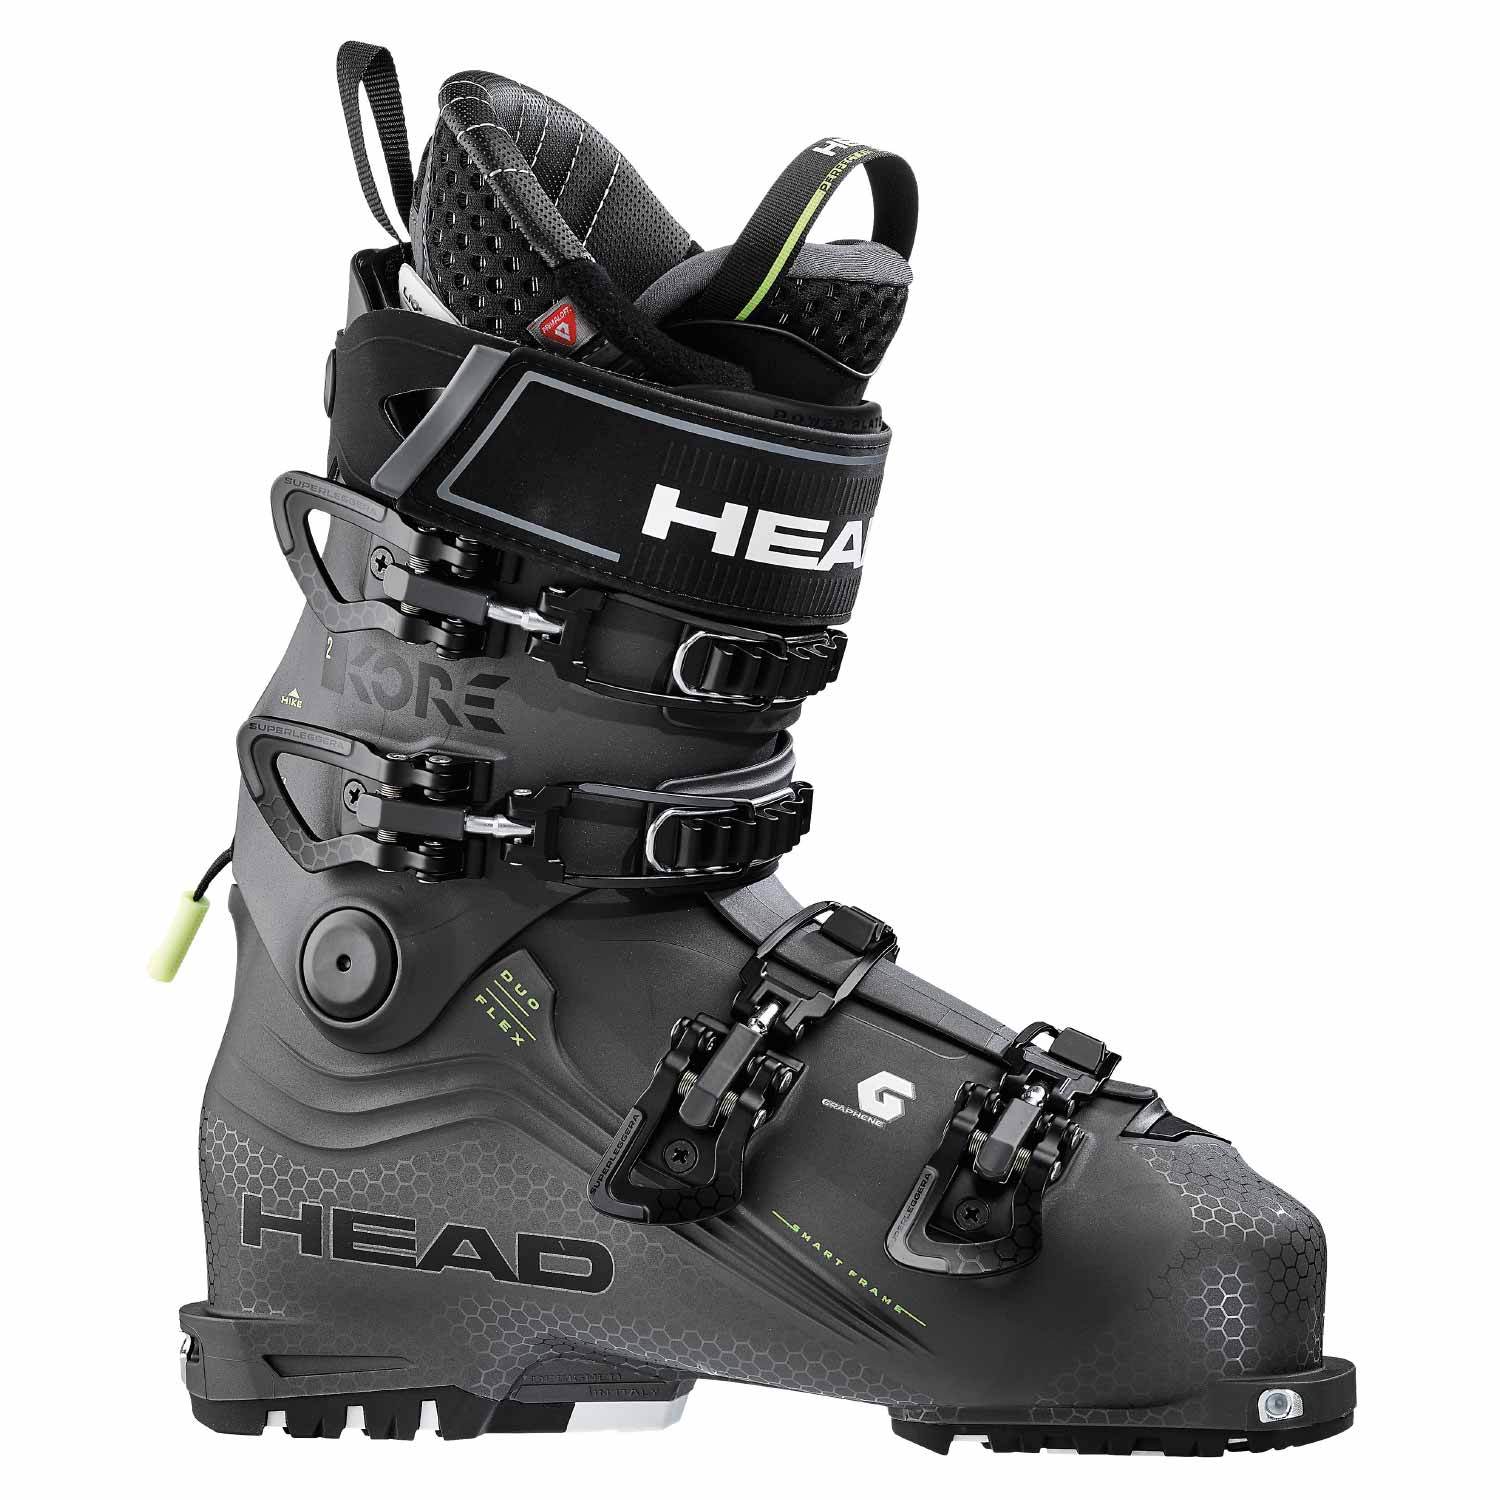 Ski touring boots: Features and tips